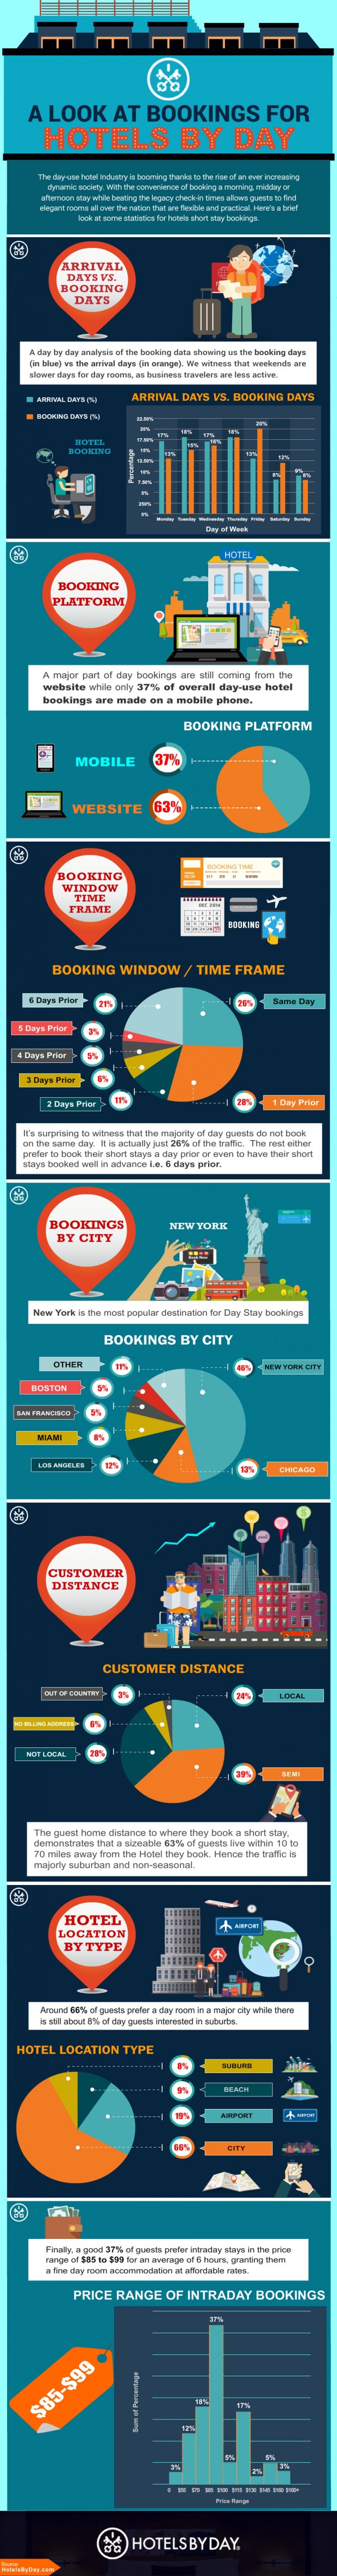 A Year of Day Room Bookings with Hotels by Day